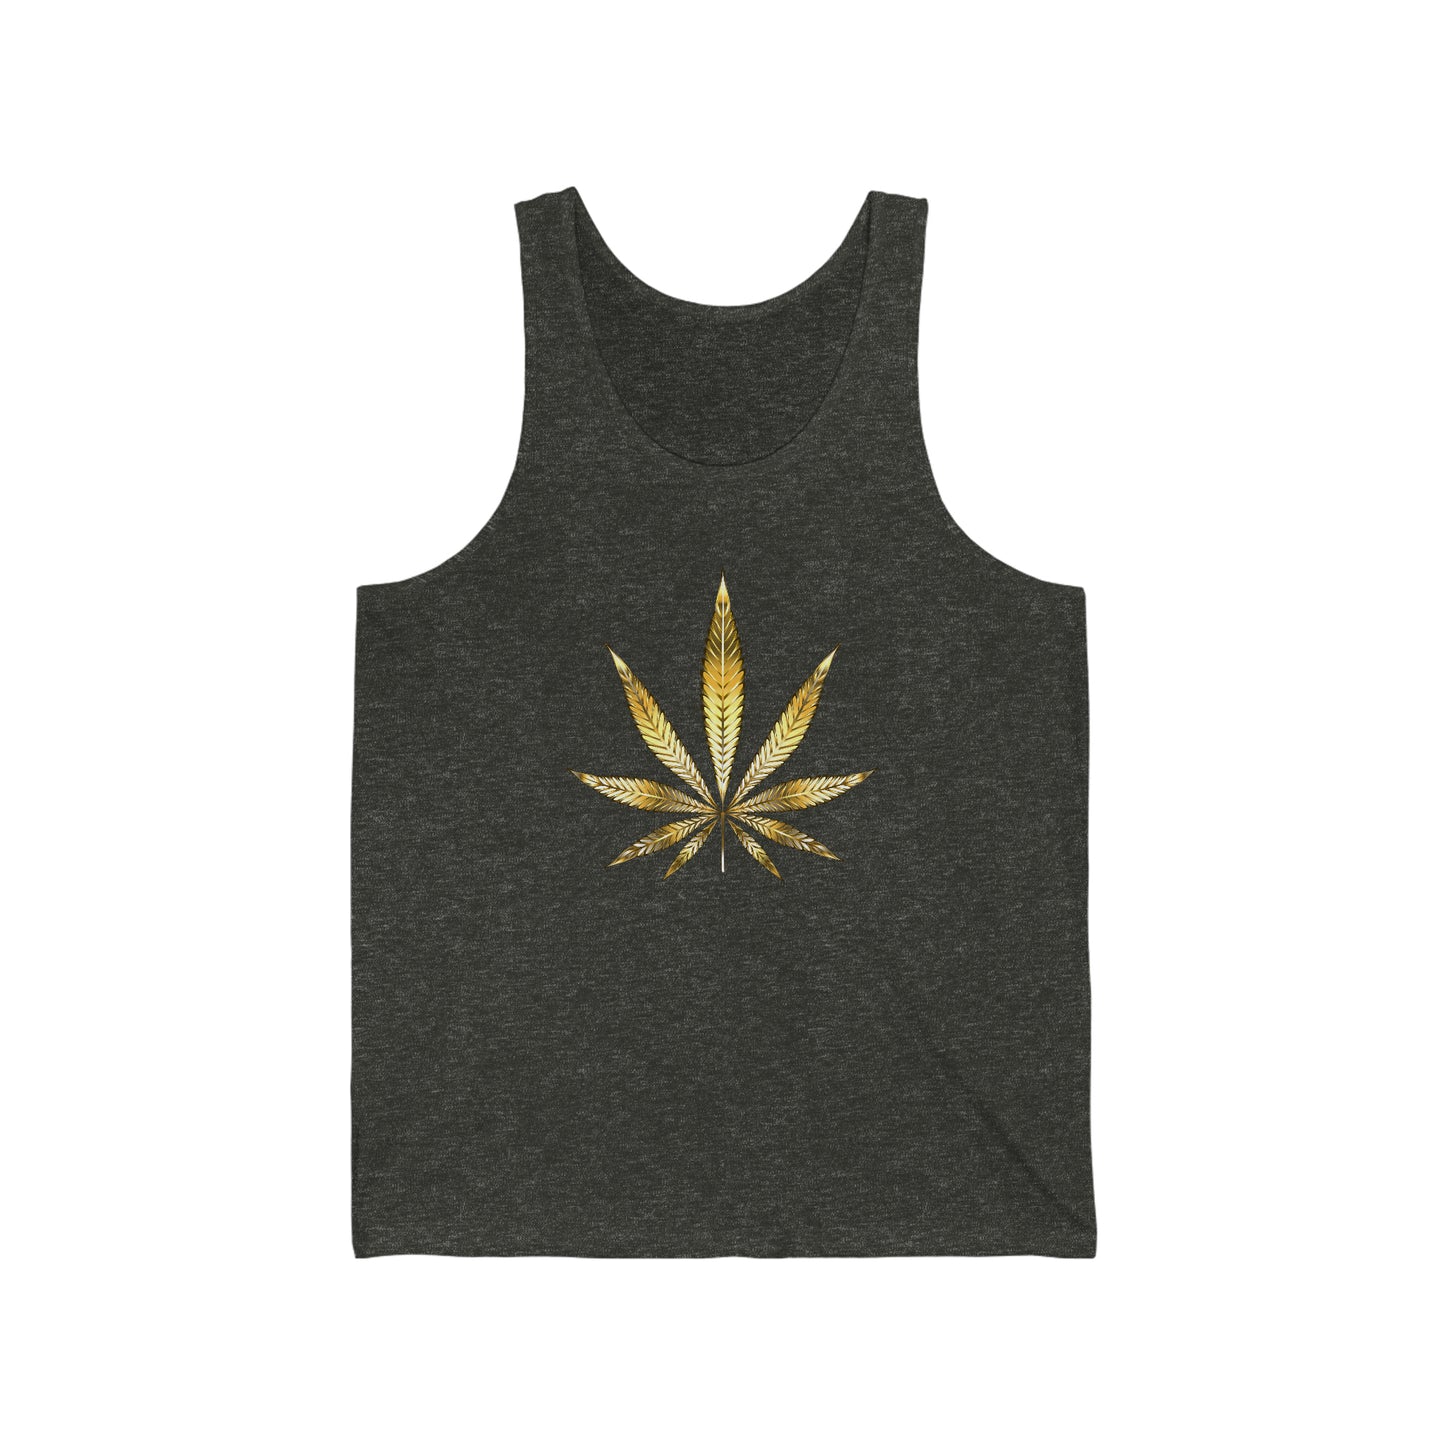 A dark heather grey tank top jersey with a bright gold weed leaf in the center